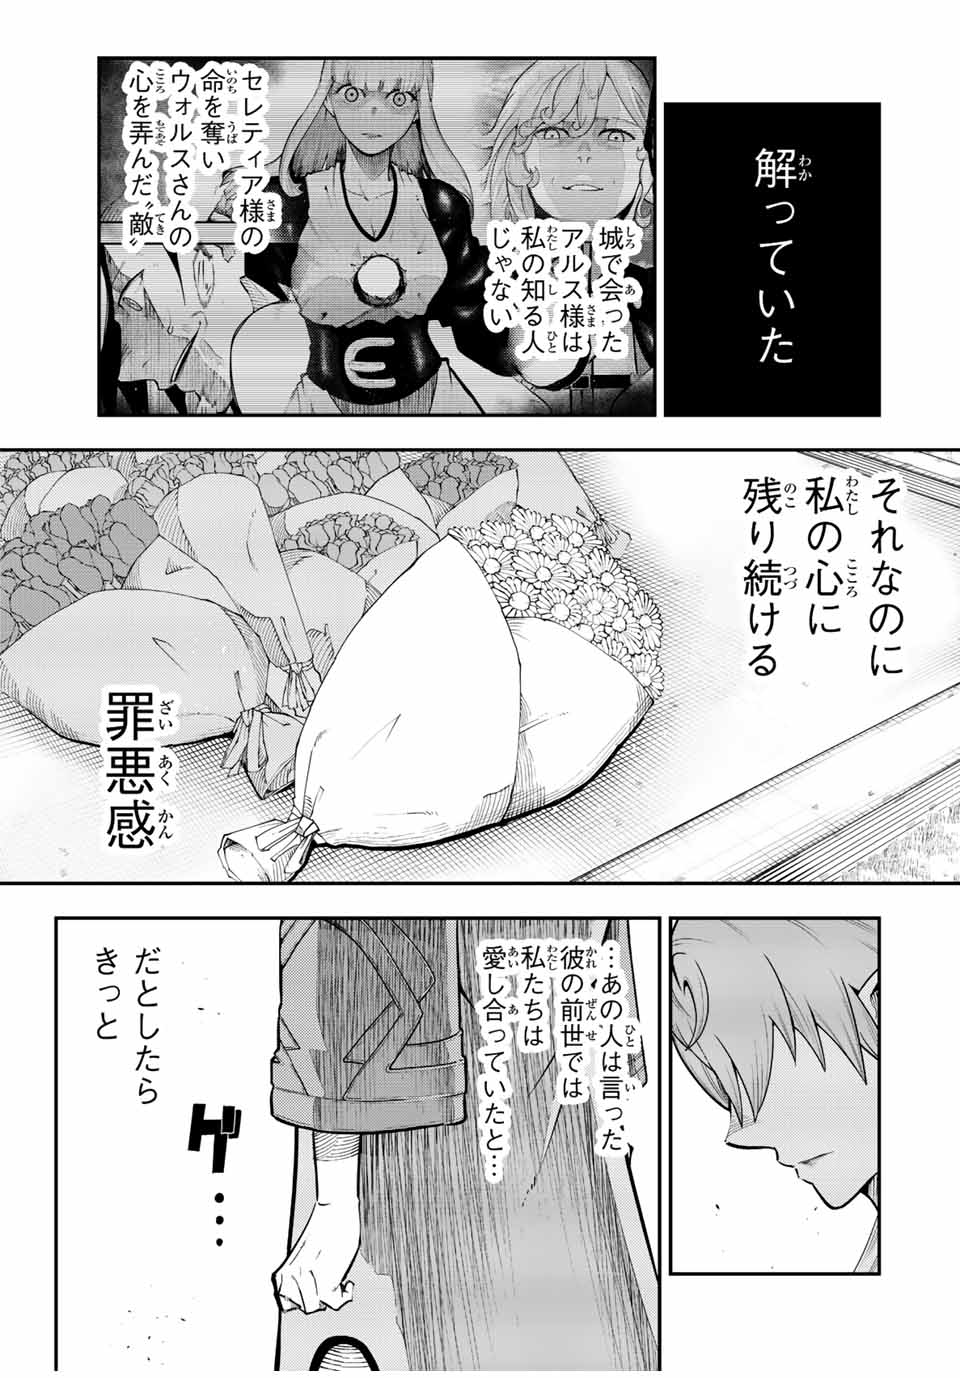 the strongest former prince-; 奴隷転生 ～その奴隷、最強の元王子につき～ 第116話 - Page 3